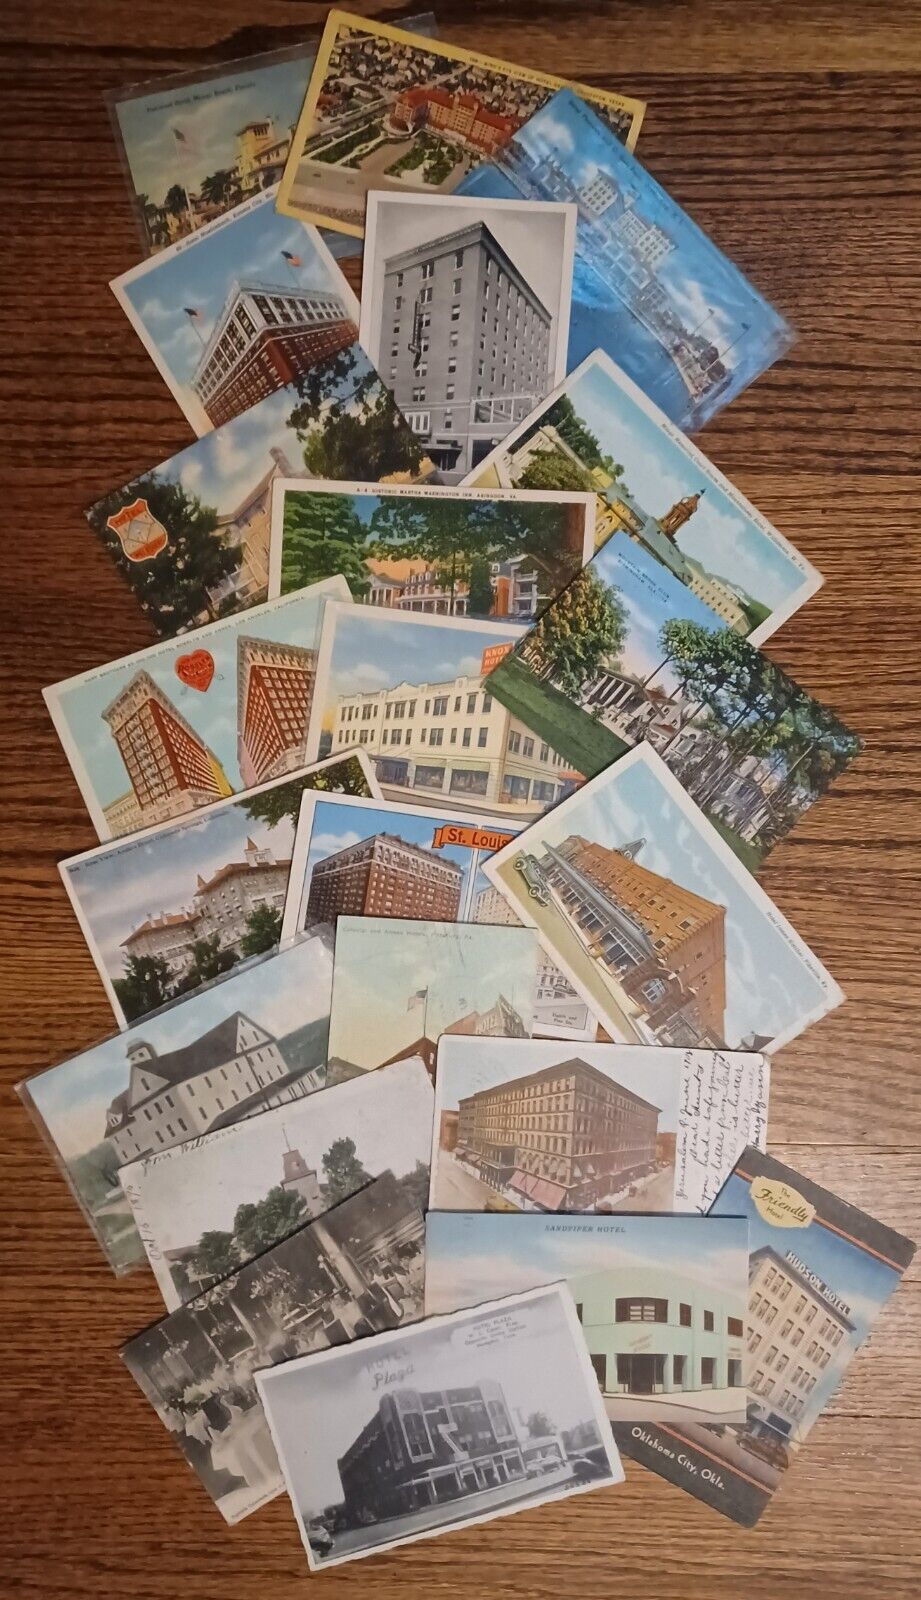 Lot of 22 Antique and Vintage Hotel Postcards 1900s-40s some Lithograph